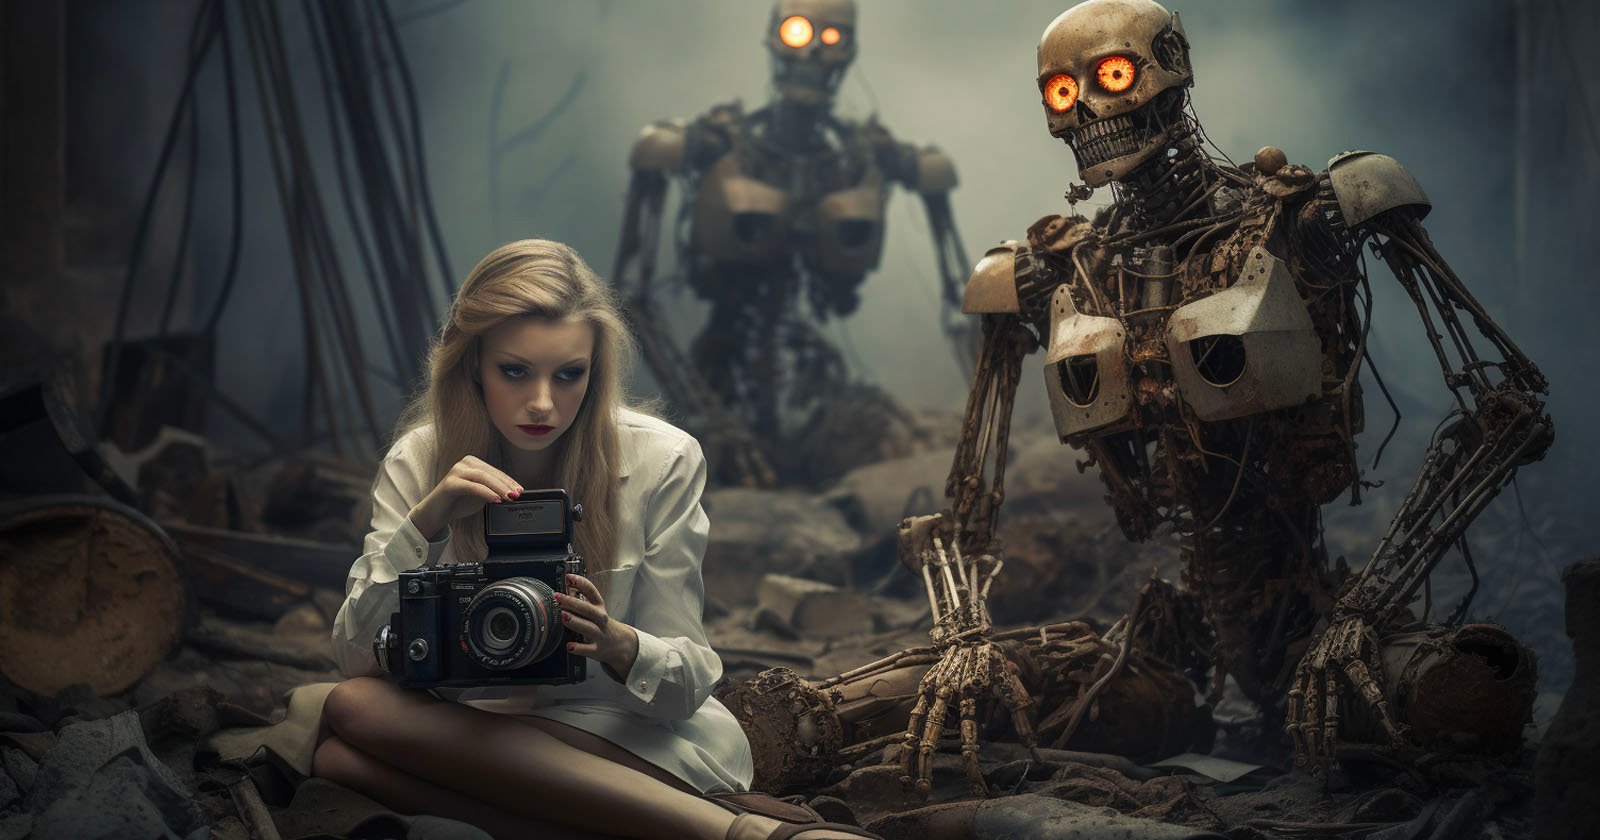 Heres Why AI Companies Think They Can Use Photographers Work Without Compensation